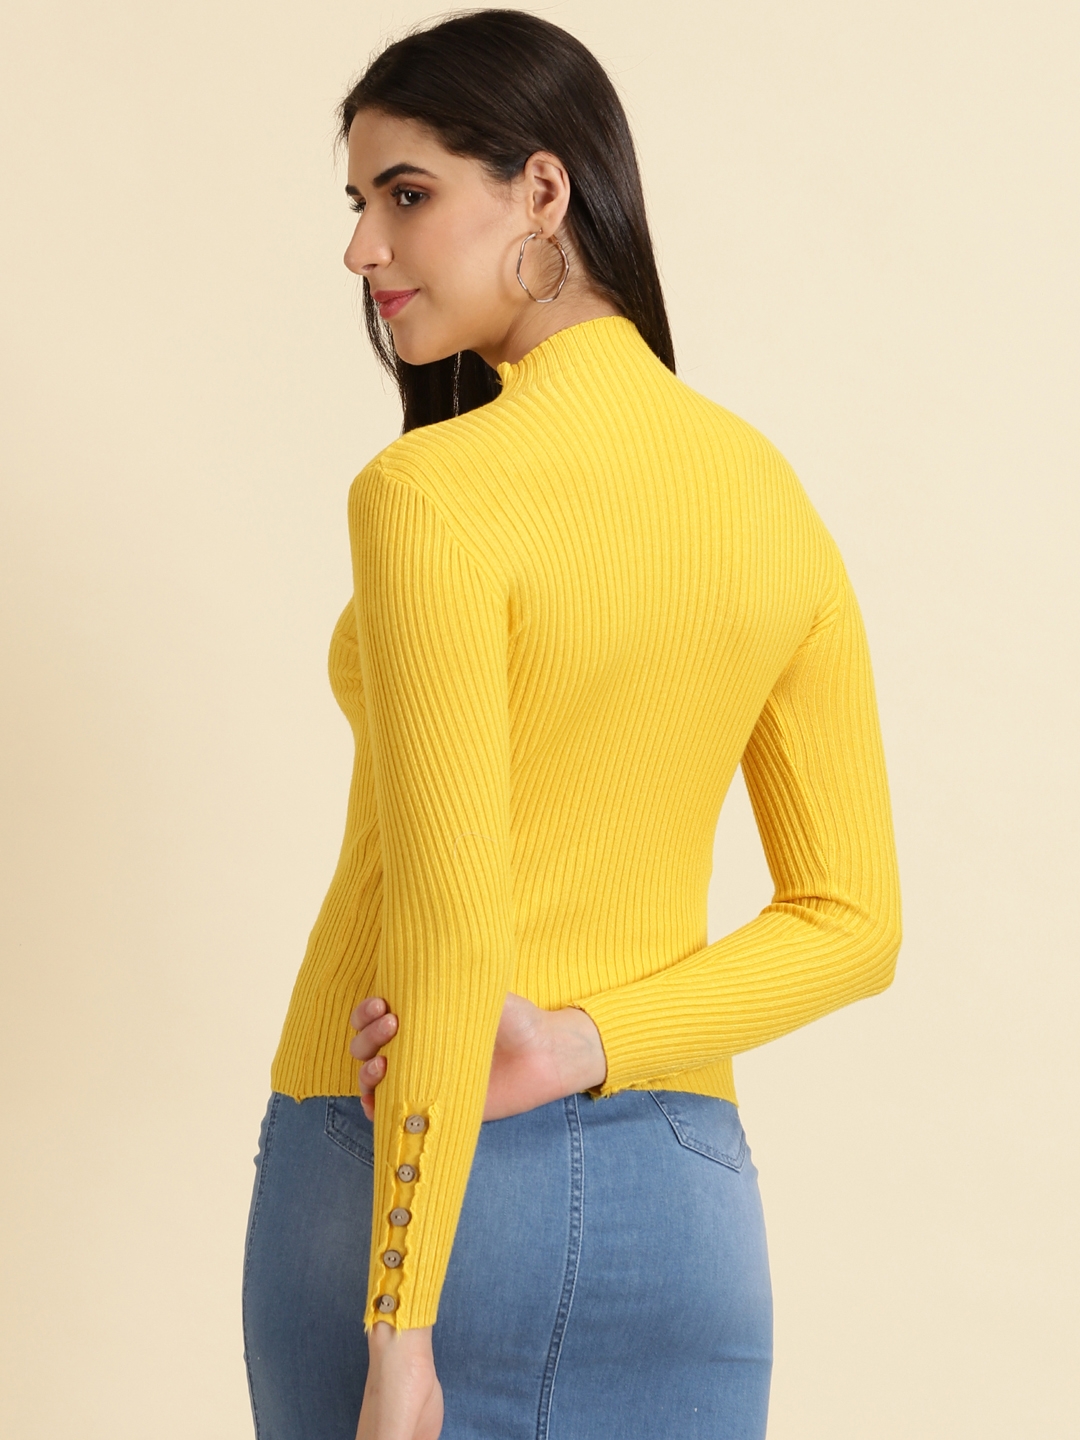 Showoff | SHOWOFF Women's High Neck Solid Yellow Fitted Regular Top 3